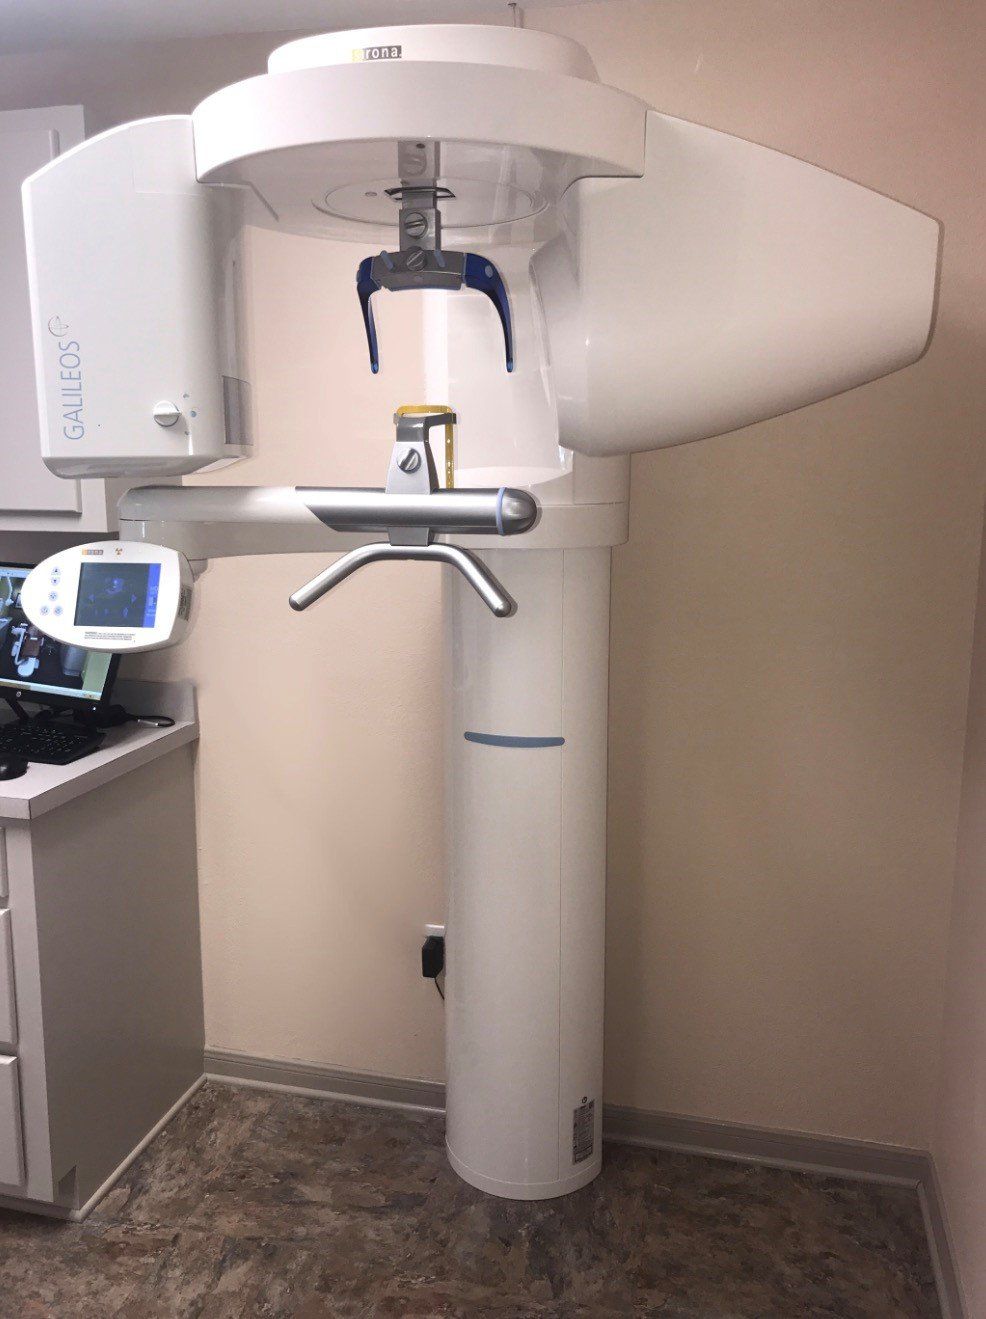 jaw scanner used by dentists